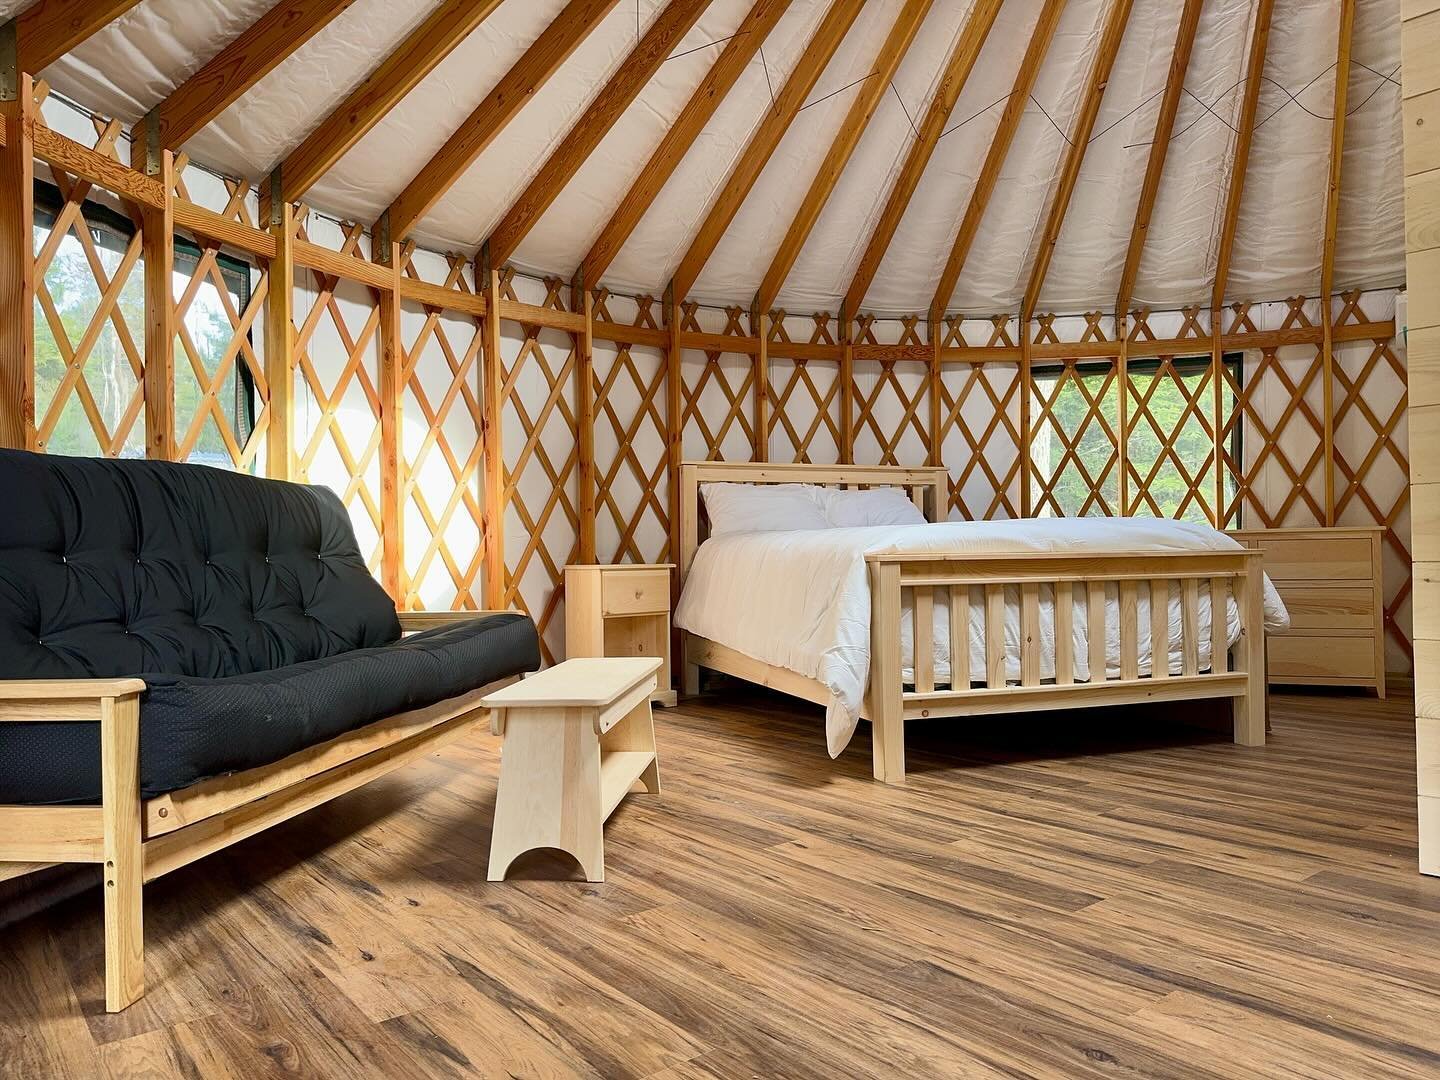 Our yurts are most comfortable for a couple or small family&mdash; with one queen sized bed and a futon couch that can provide an extra bed for little ones.